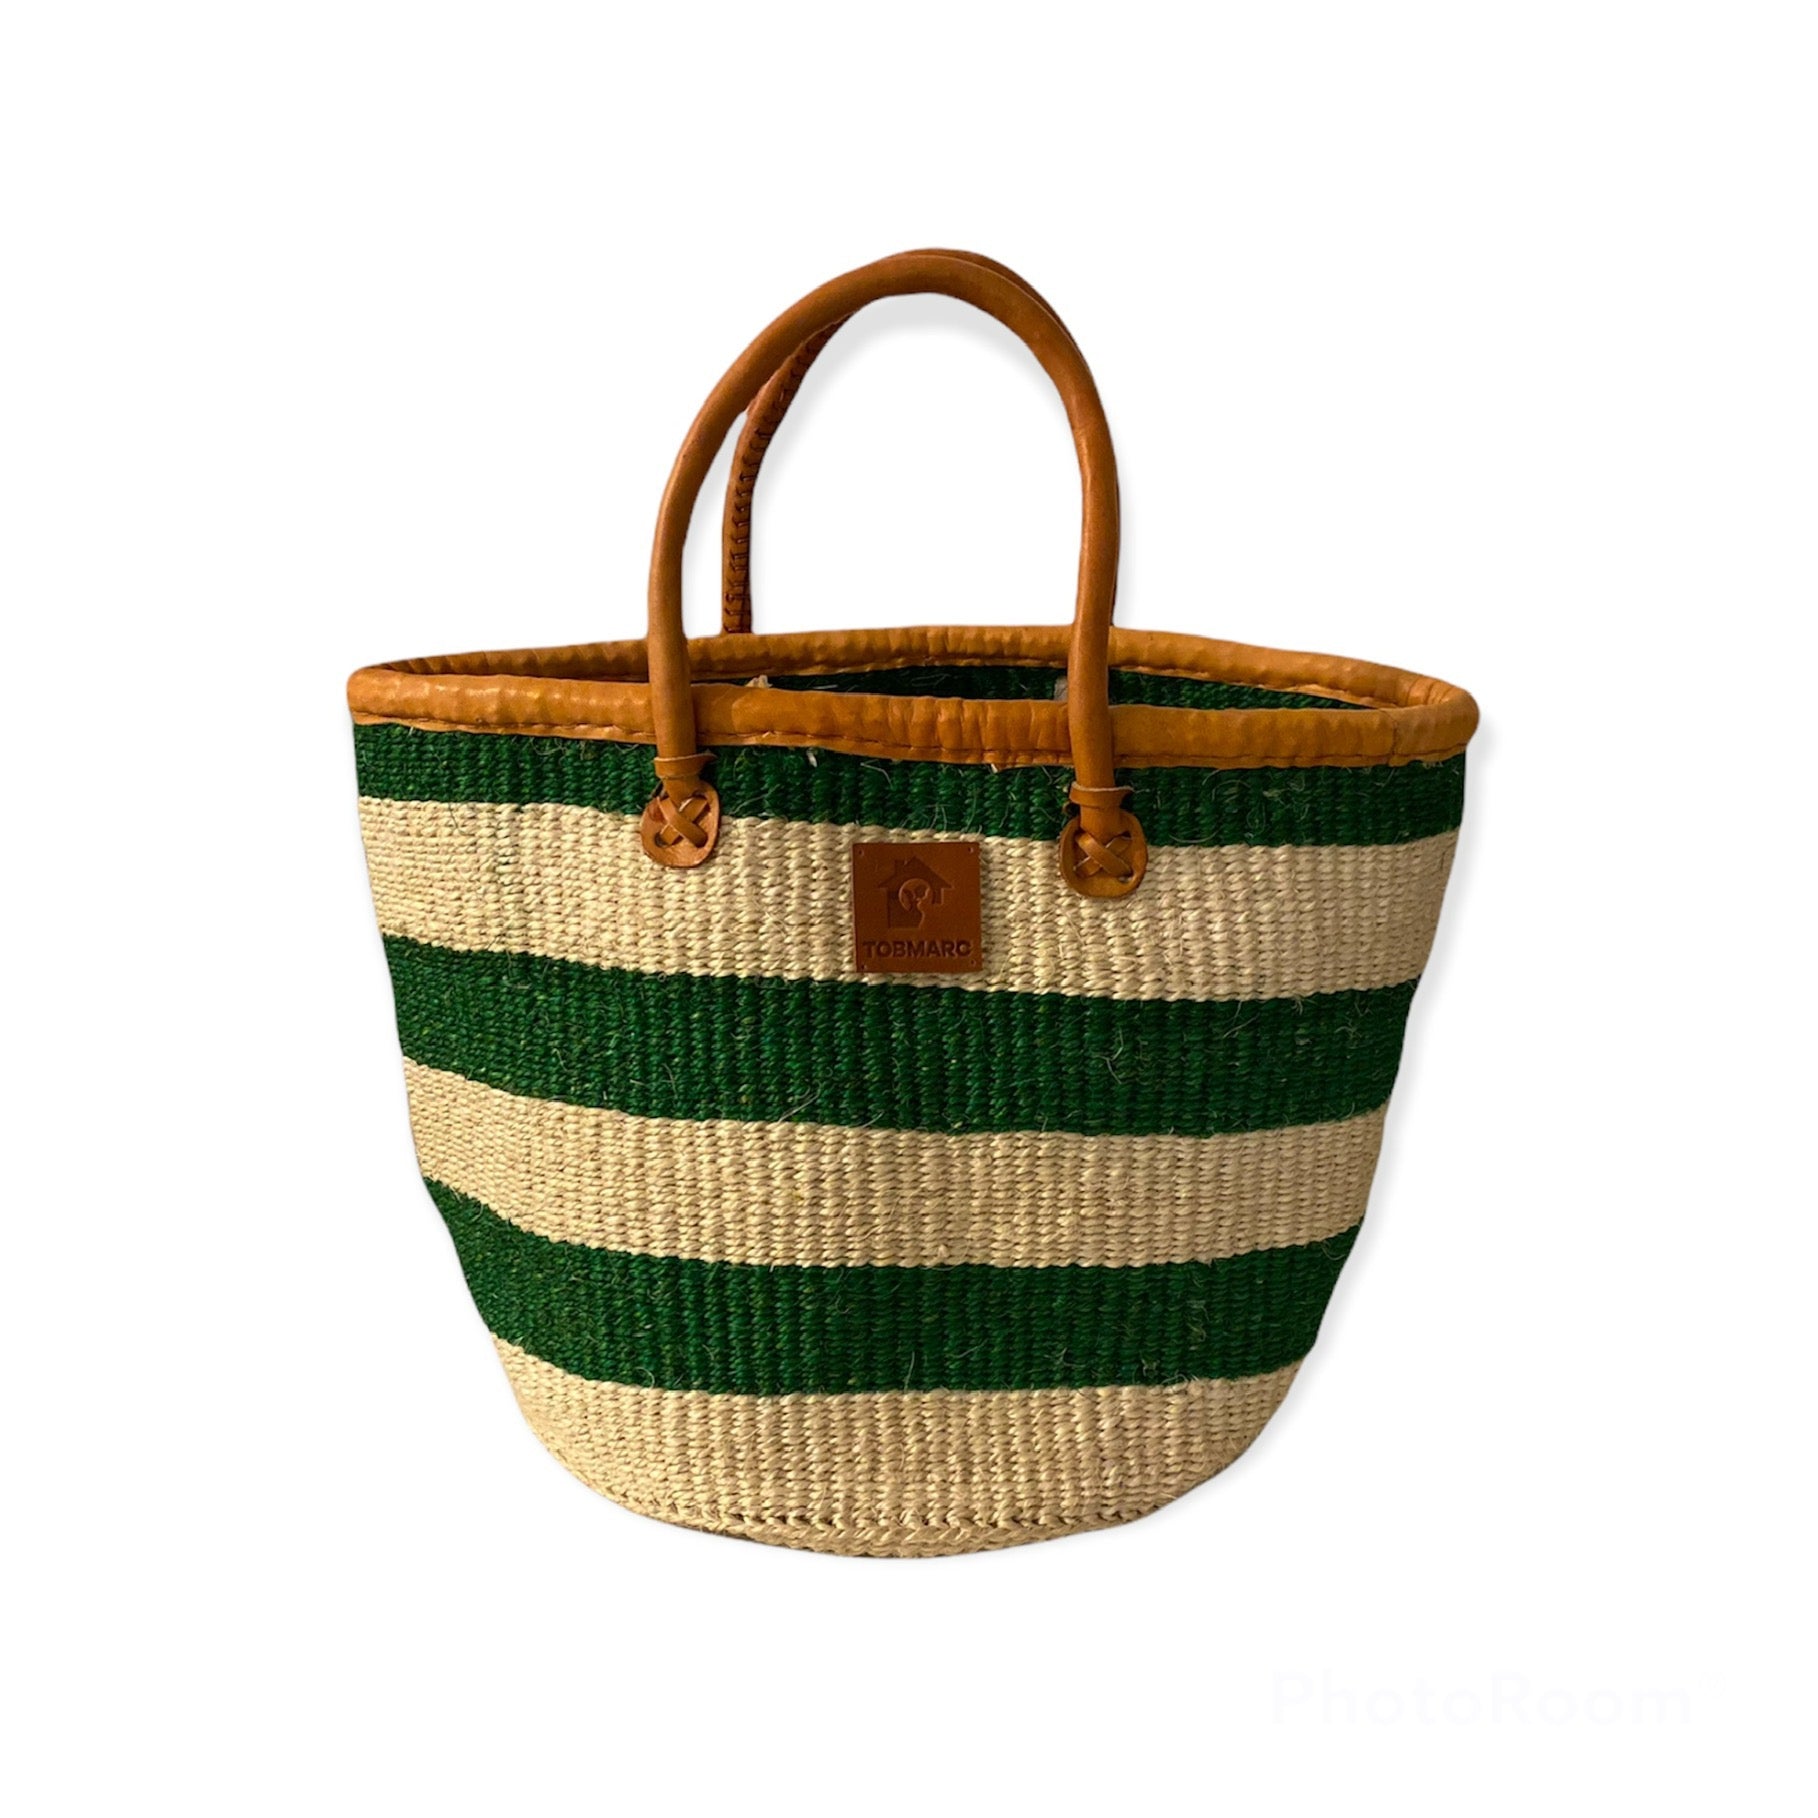 Handwoven Basket with handles for Storage set